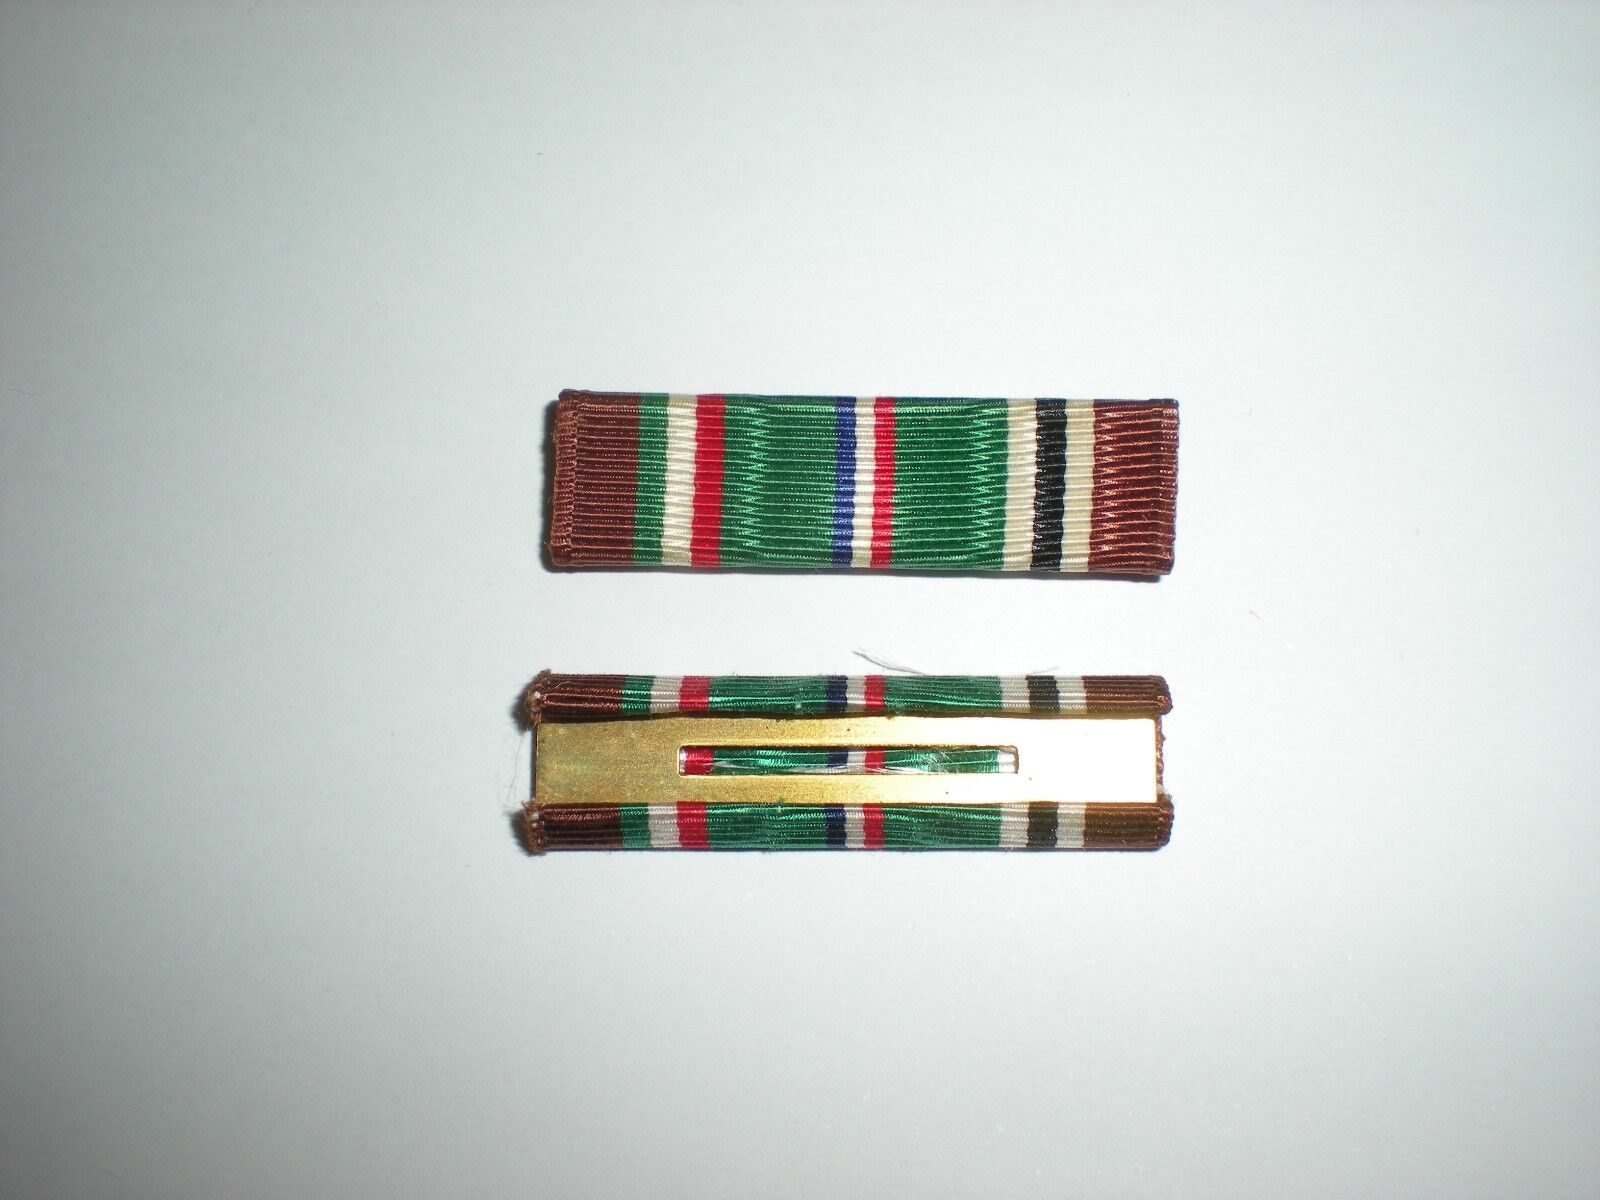 ORIGINAL WWII US ARMY EUROPEAN CAMPAIGN  MEDAL RIBBON FROM 1945 DATED BOX